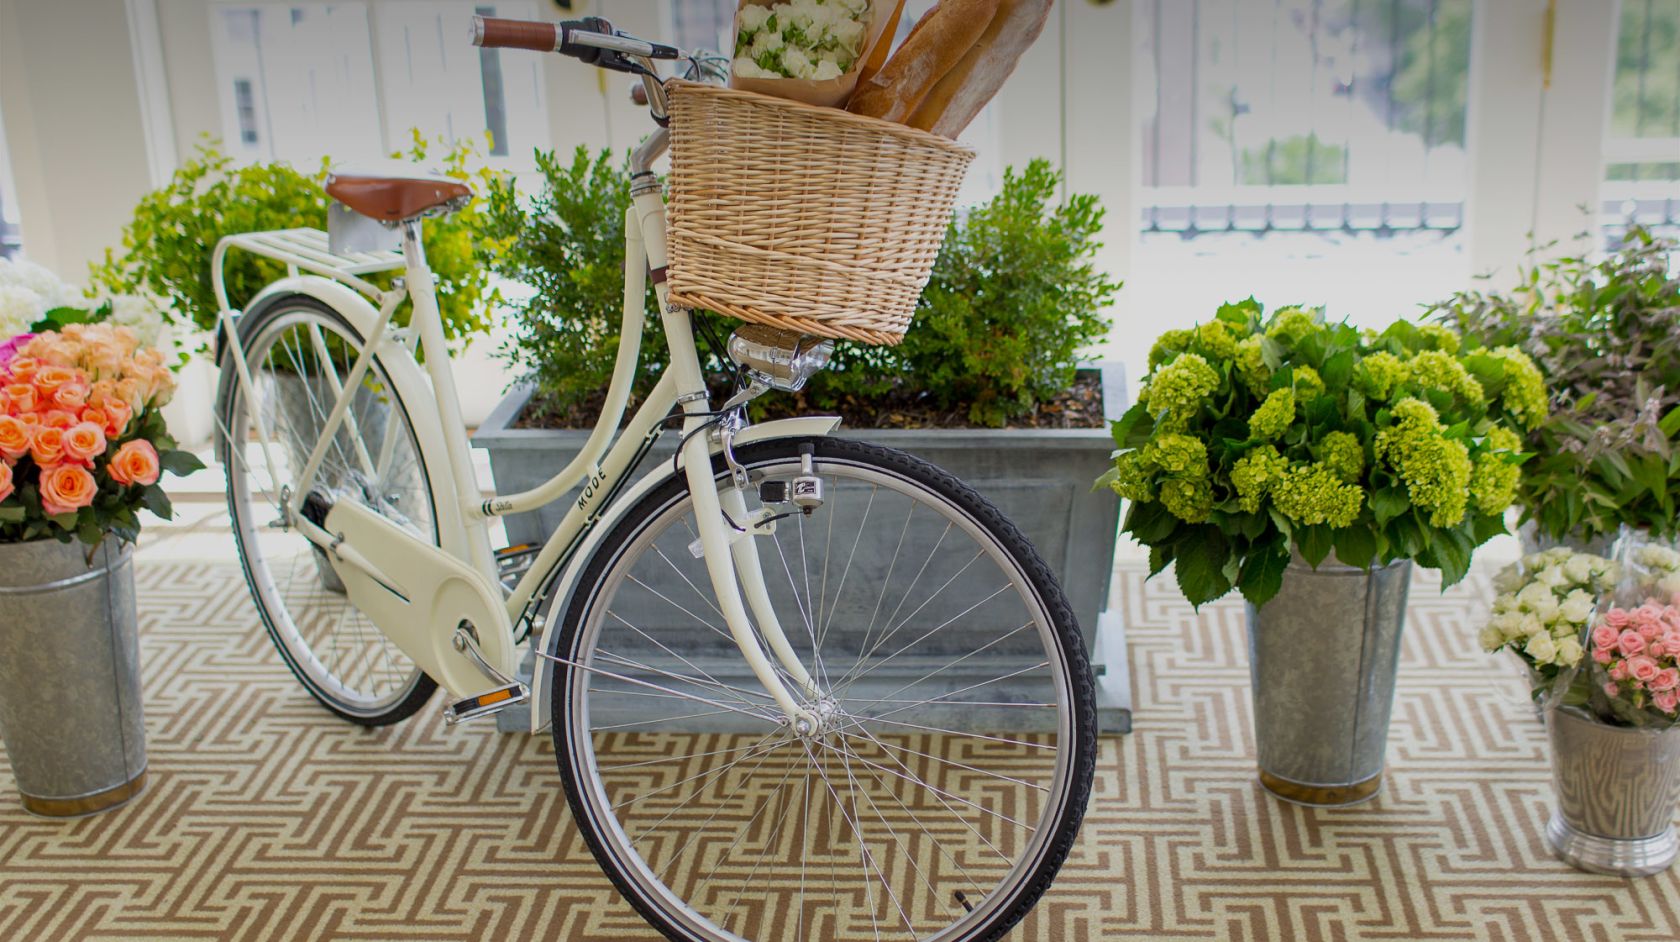 a bicycle with basket sitting in a room with vases of flowers